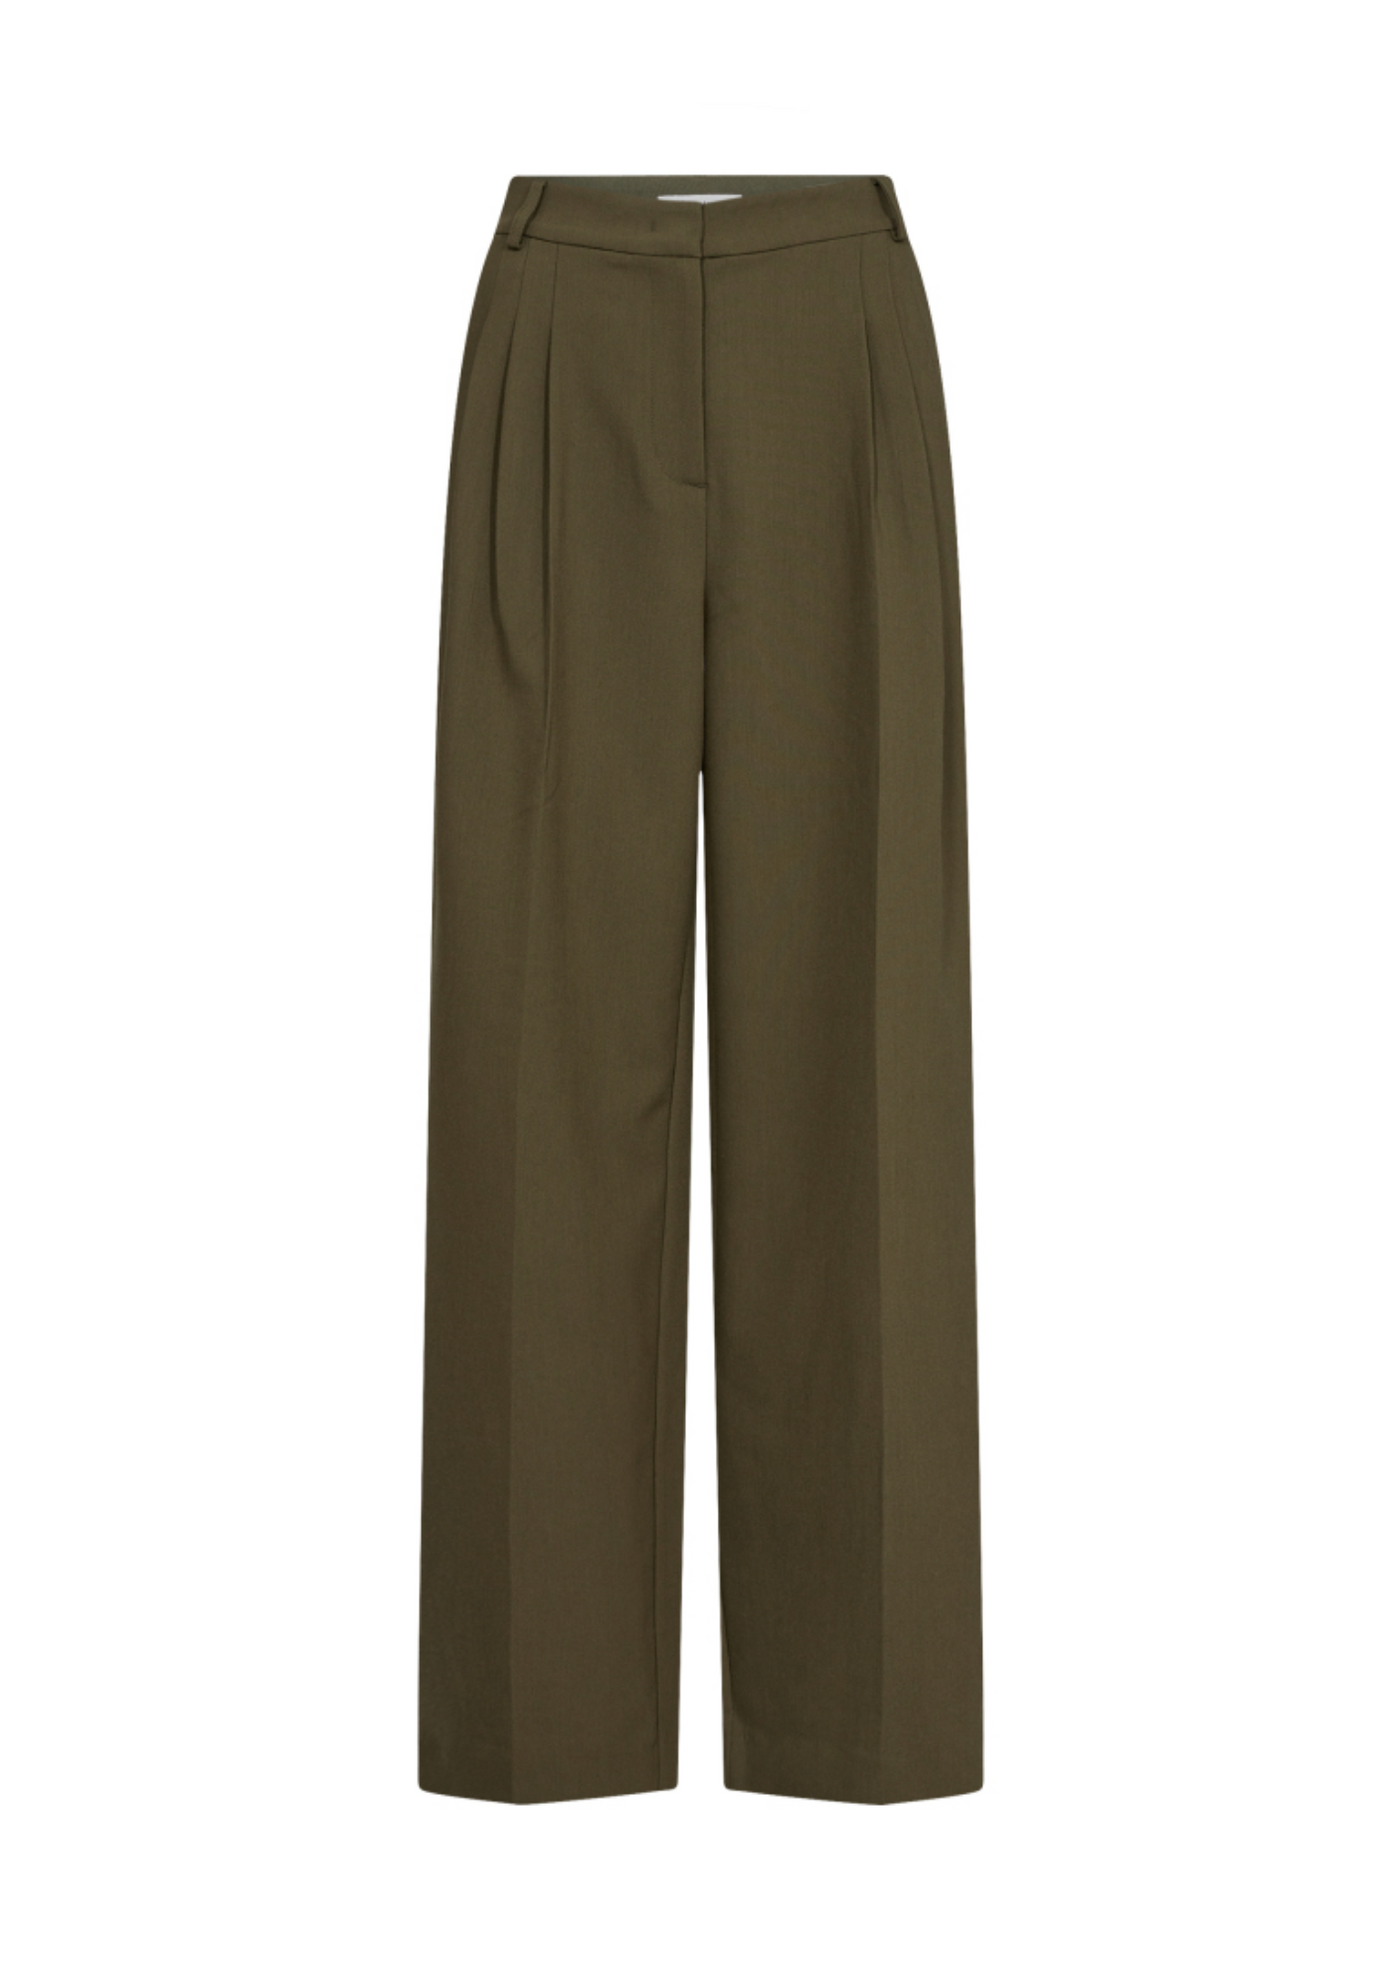 Co' Couture | VolaCC Long Pleat Pants Army